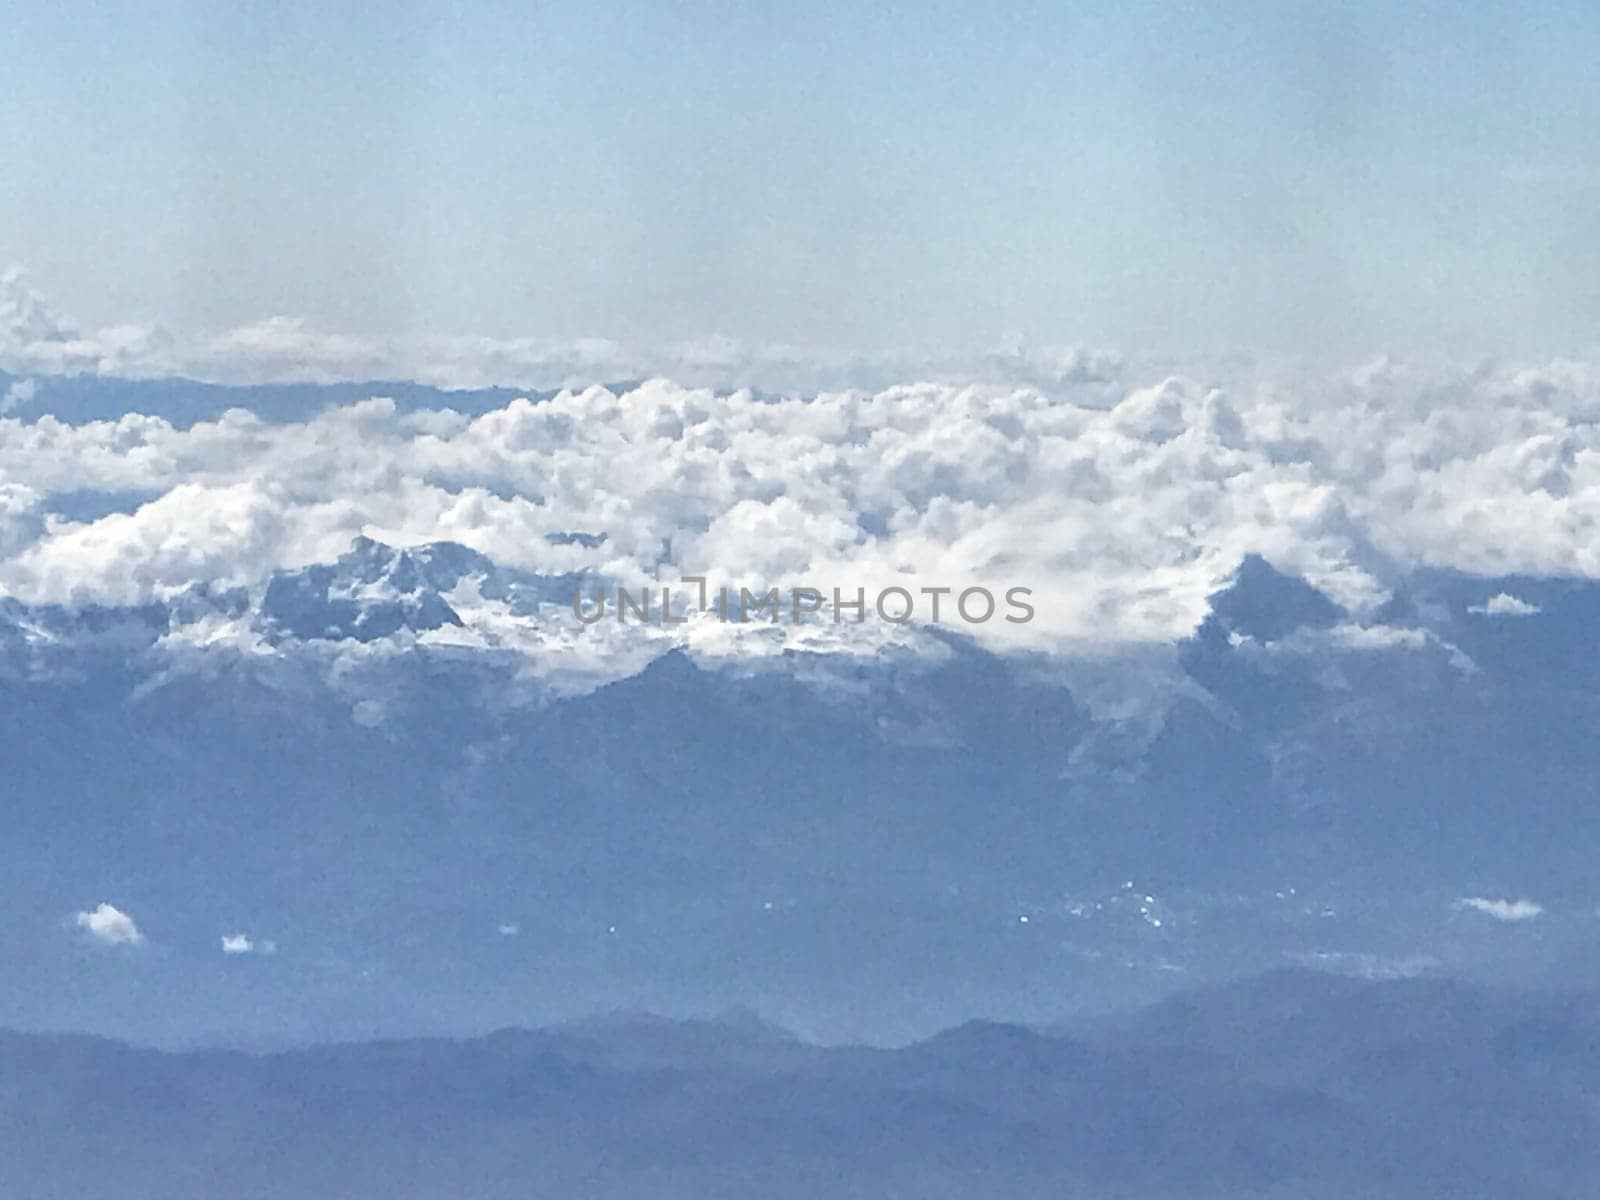 Aerial view showing the top of snow-capped mountains emerging from fluffy clouds